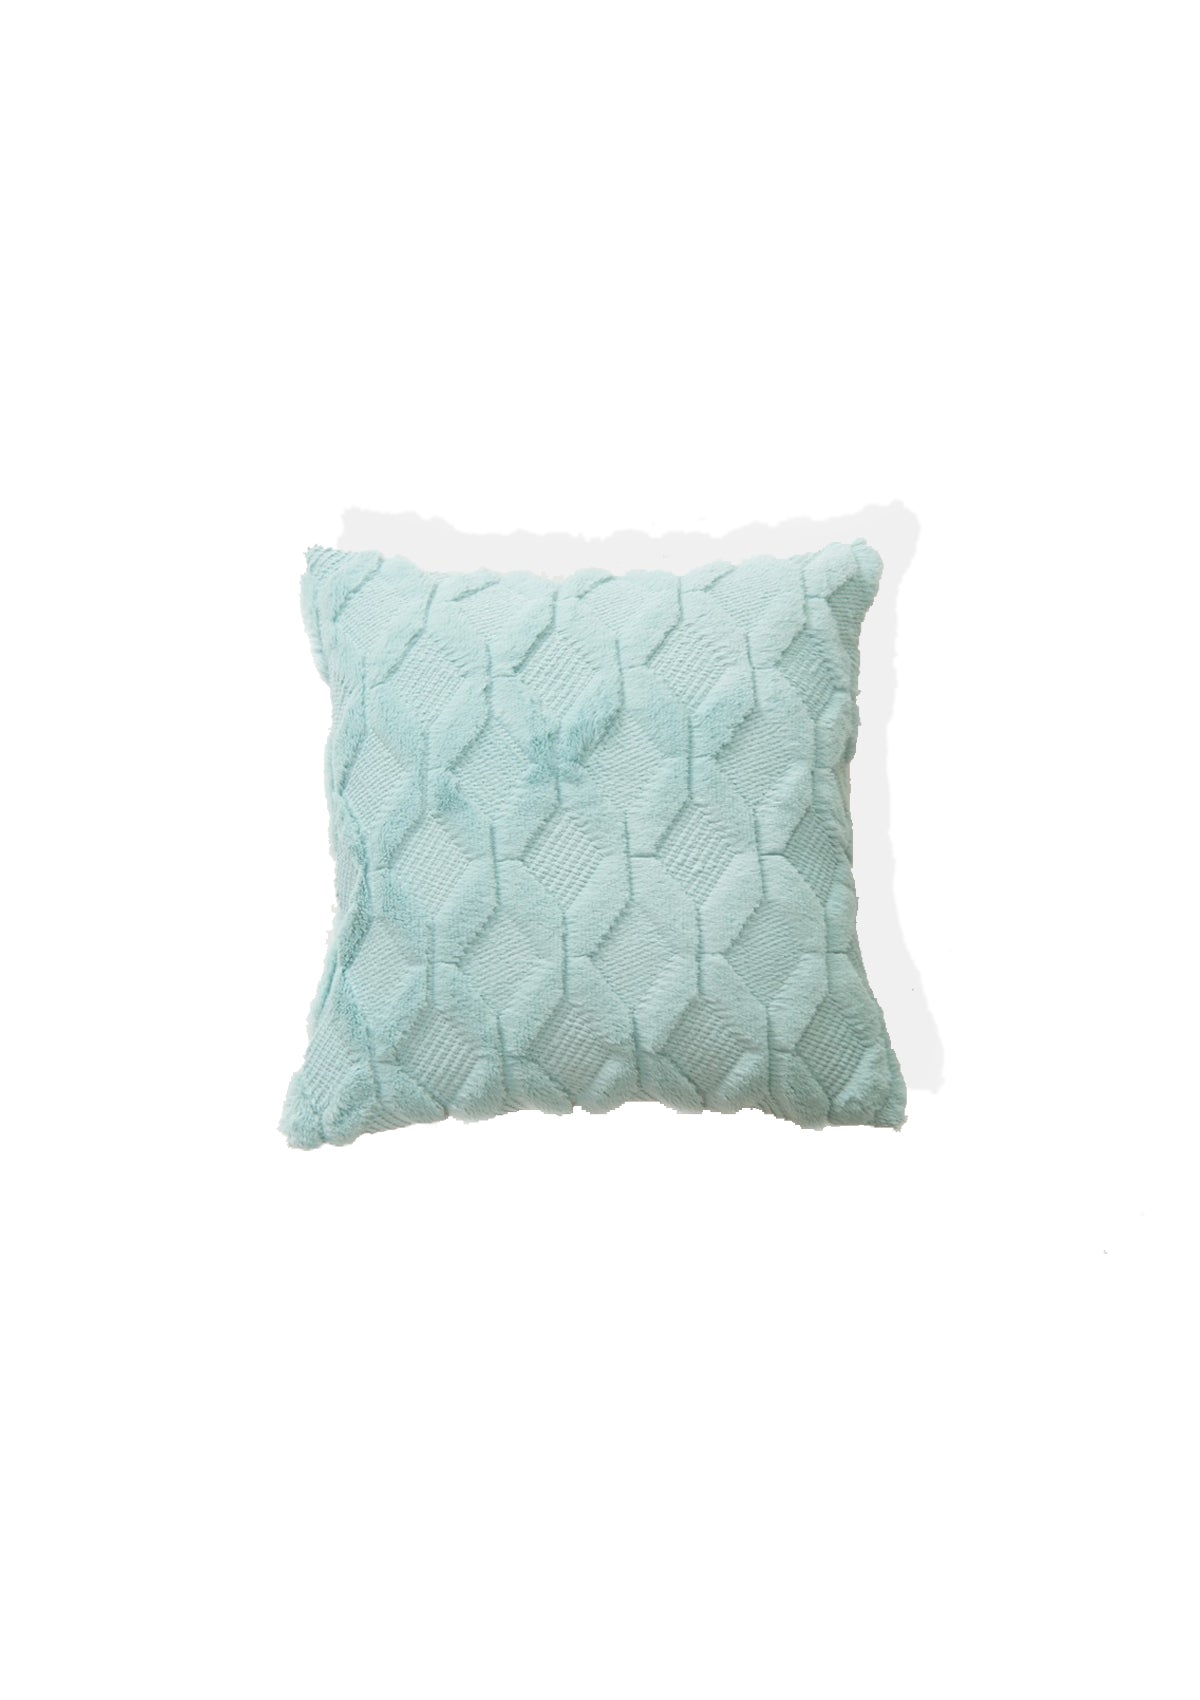 Teal Elegance Fluffy Cushion Covers | CovermyCushion